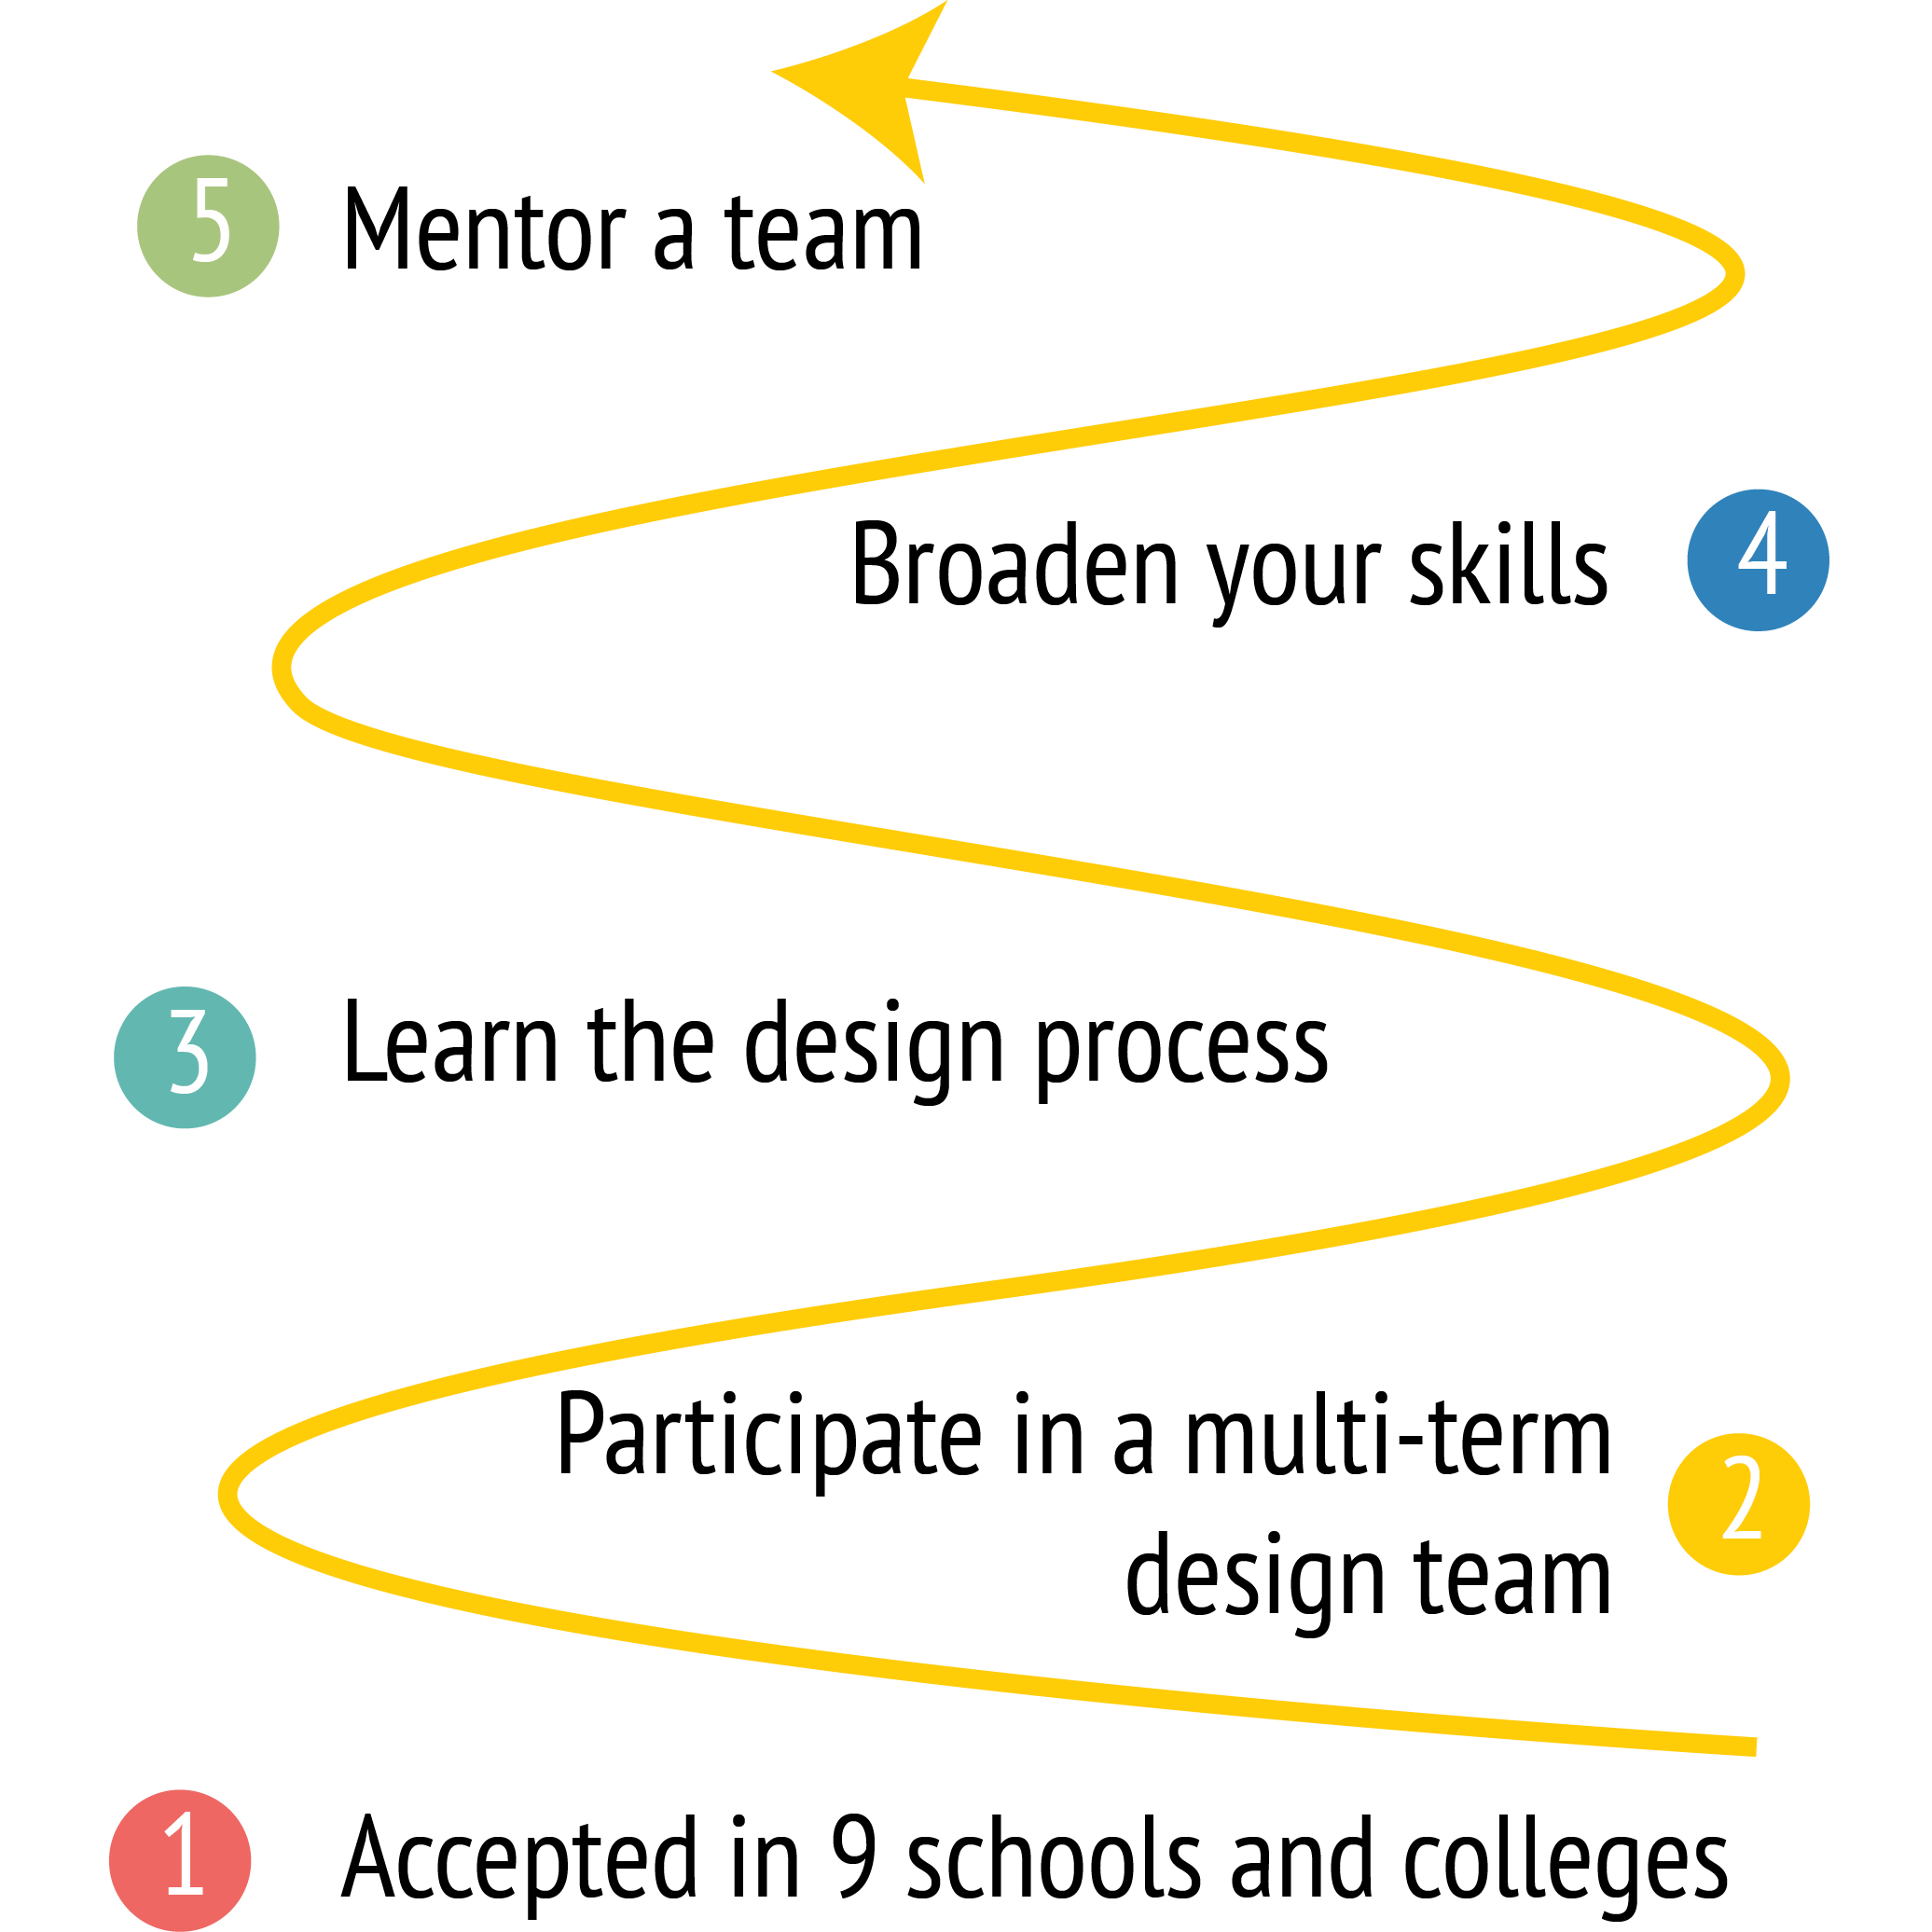 Zig-zag yellow arrow following five steps: Accepted in 9 schools and colleges, Participate in a multi-term design team, Learn the design process, Broaden your skills, and Mentor a team.